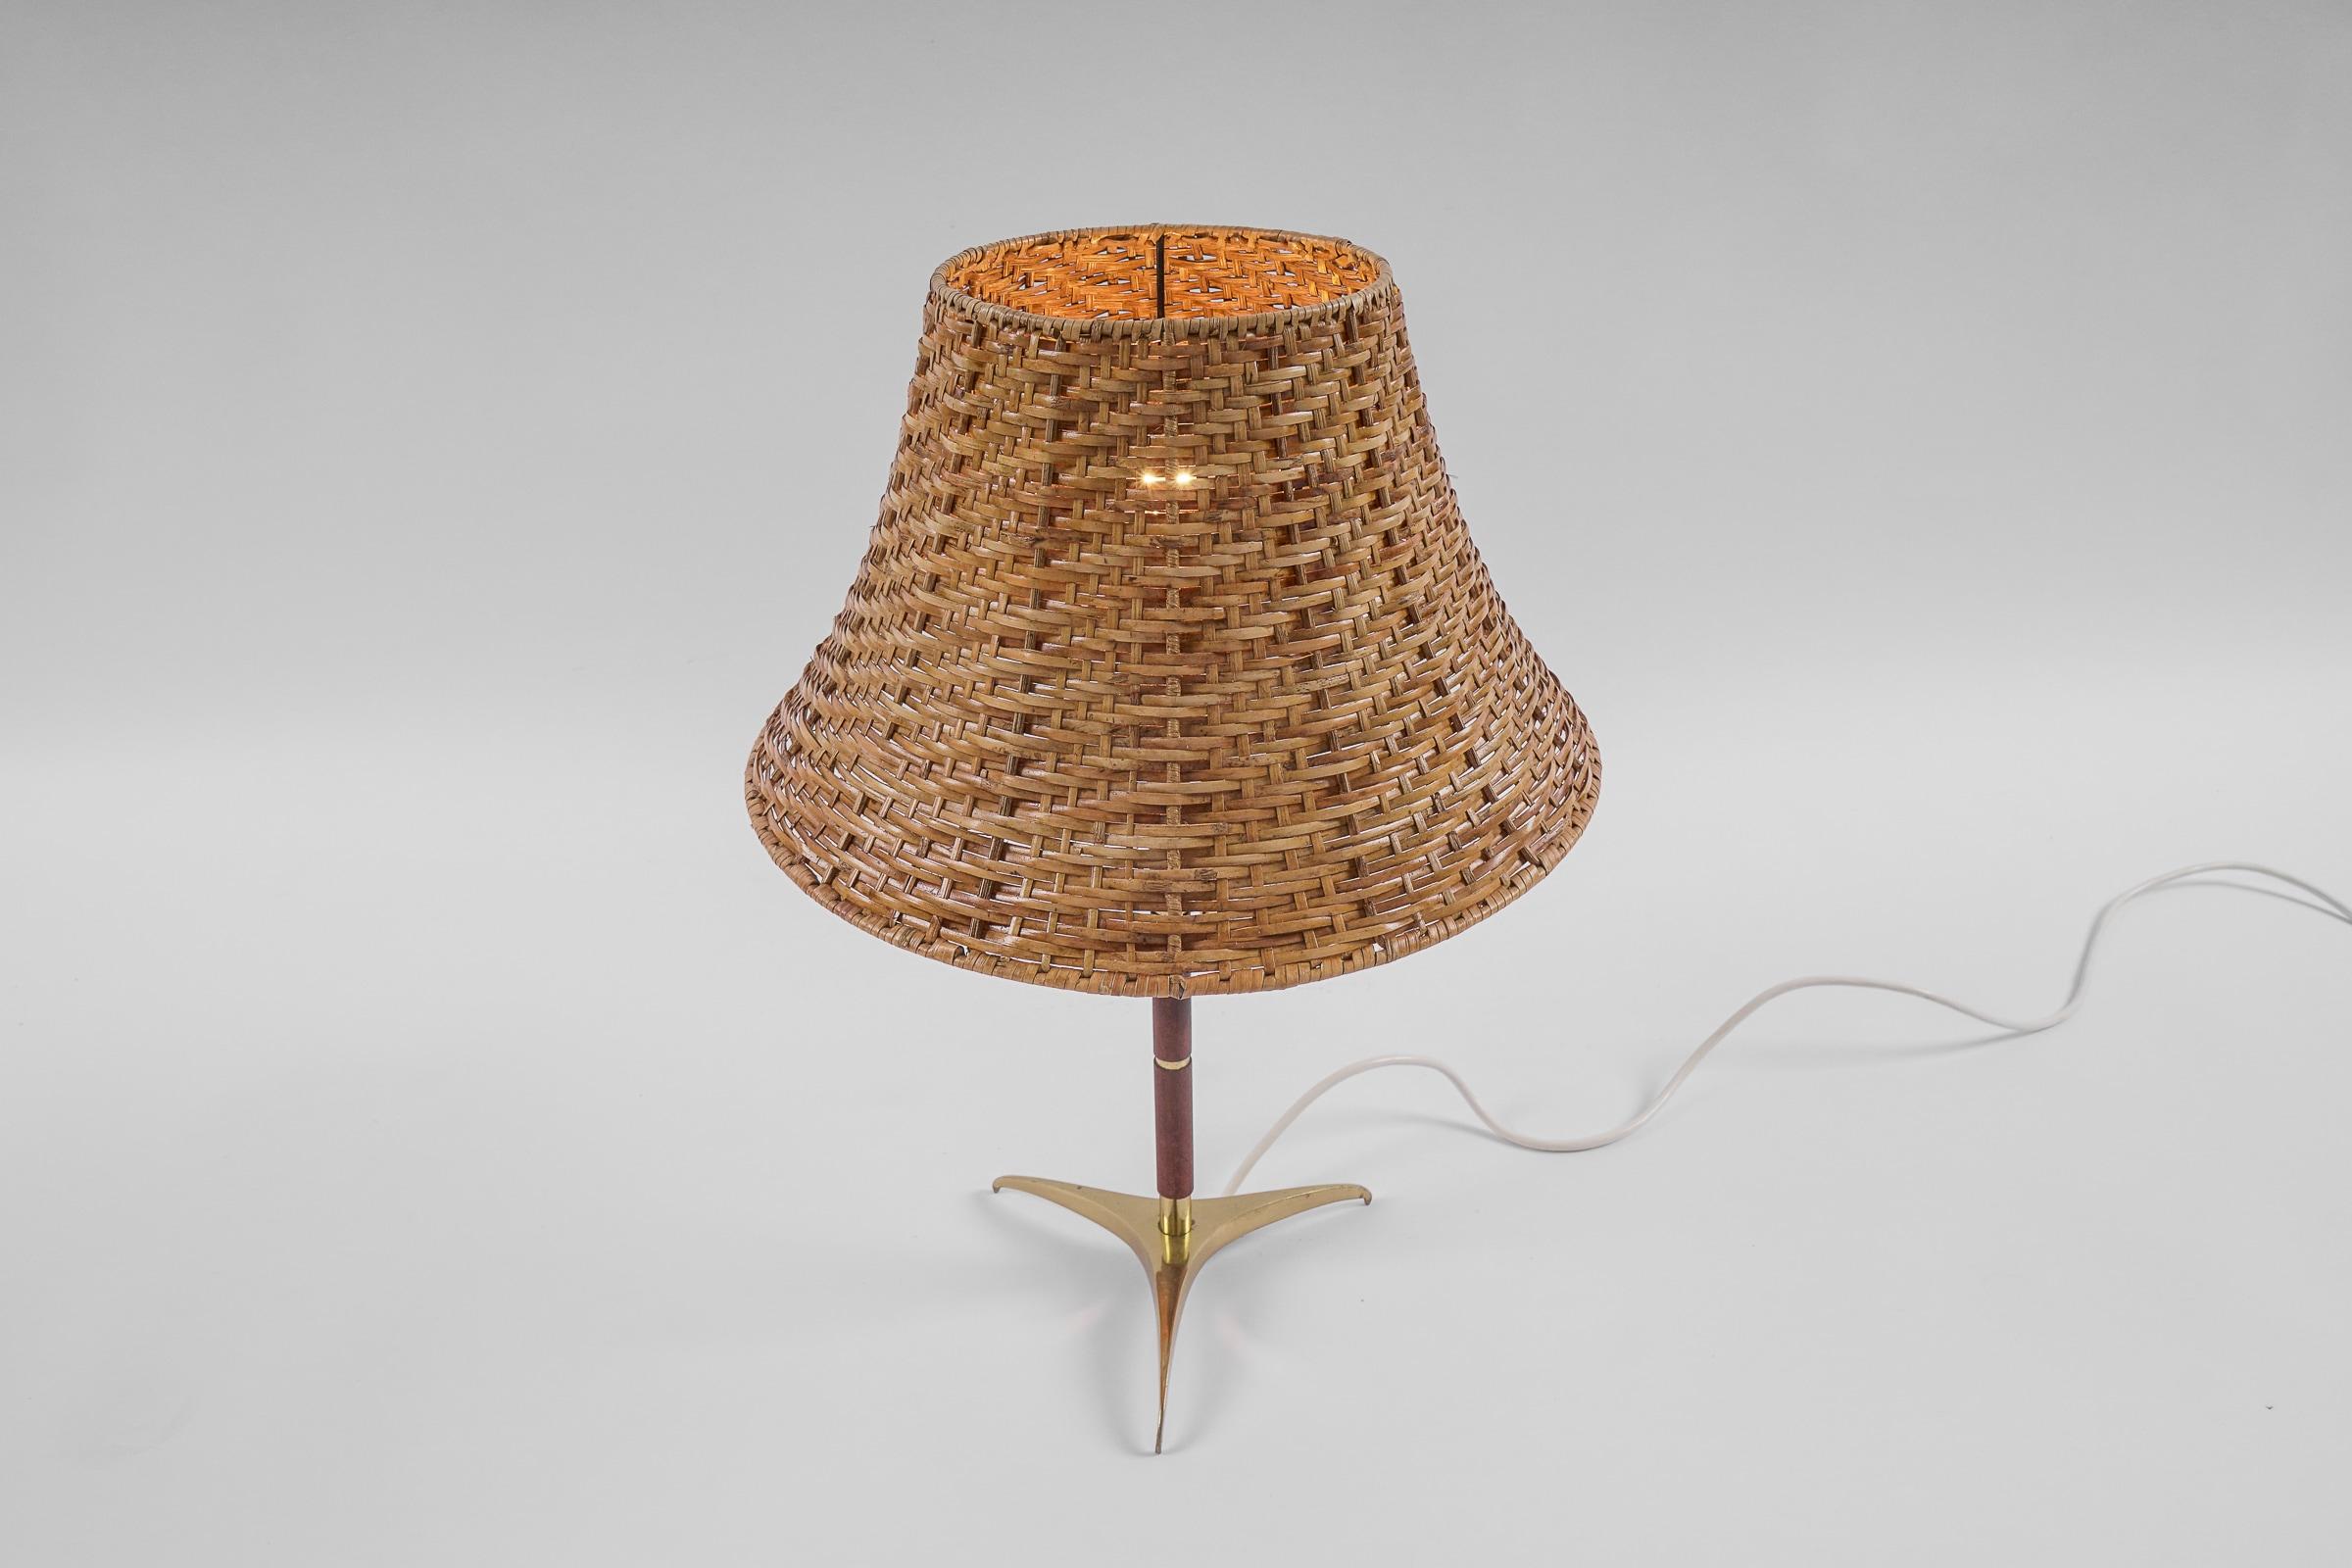 Lovely Mid-Century Modern Table Lamp in Brass, Wicker and Teak, 1950s, Austria For Sale 6